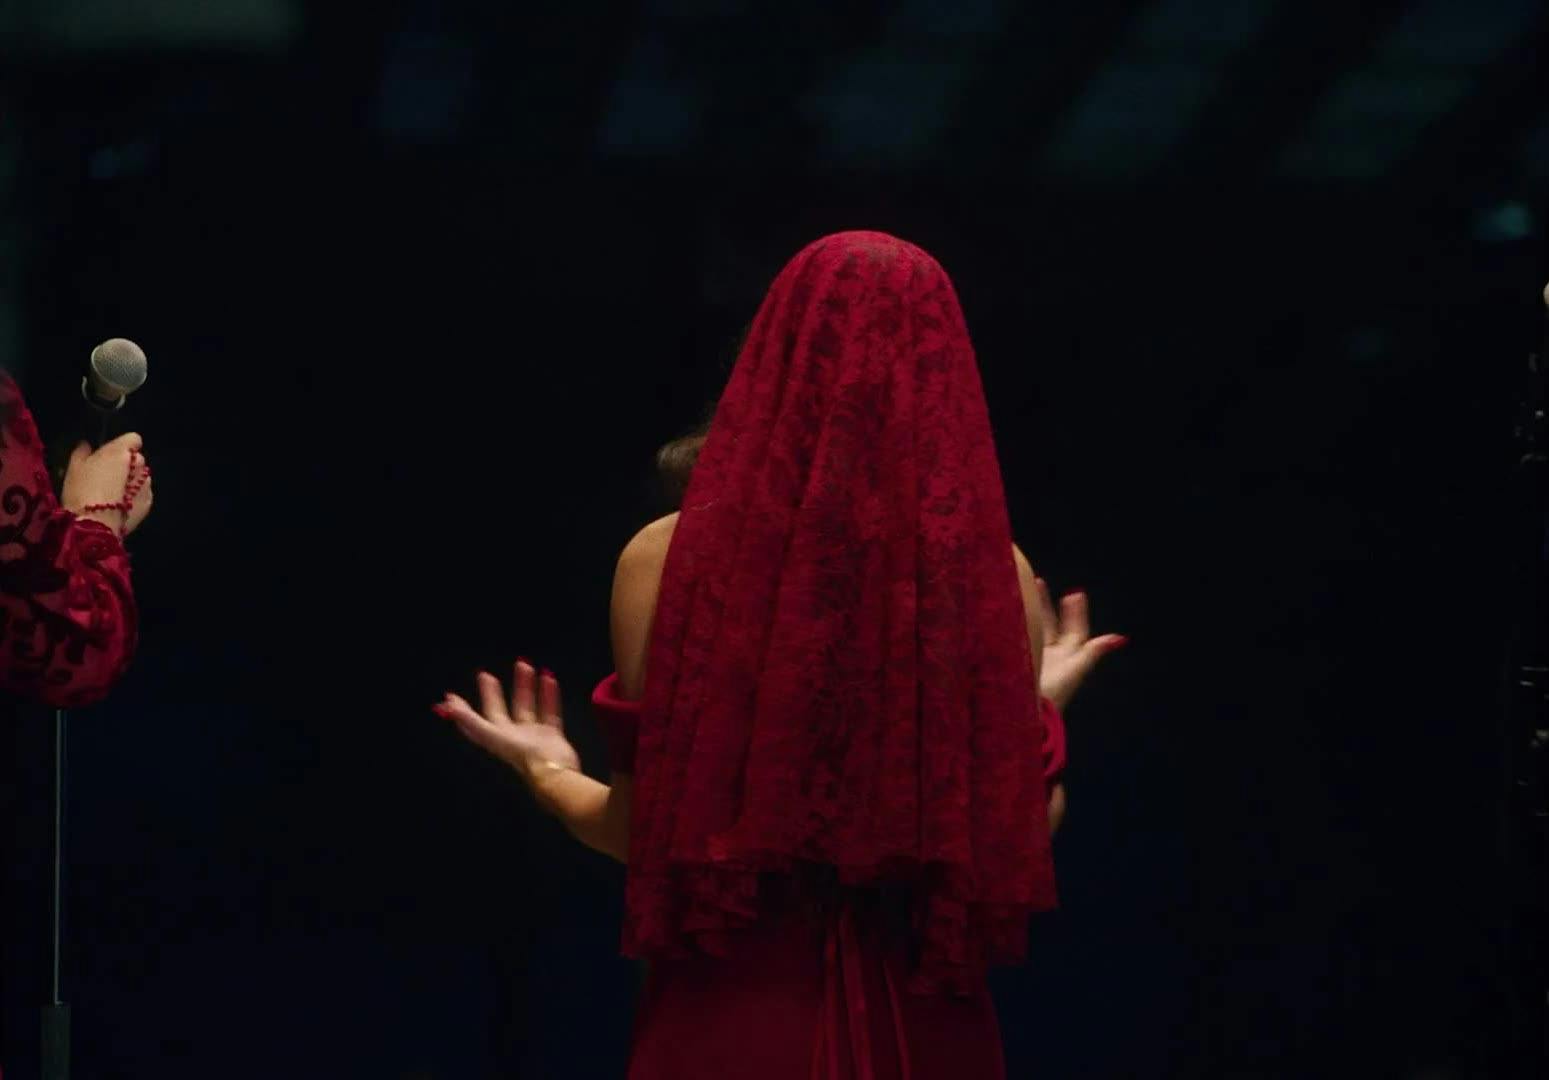 A woman in a red veil is shown from the back